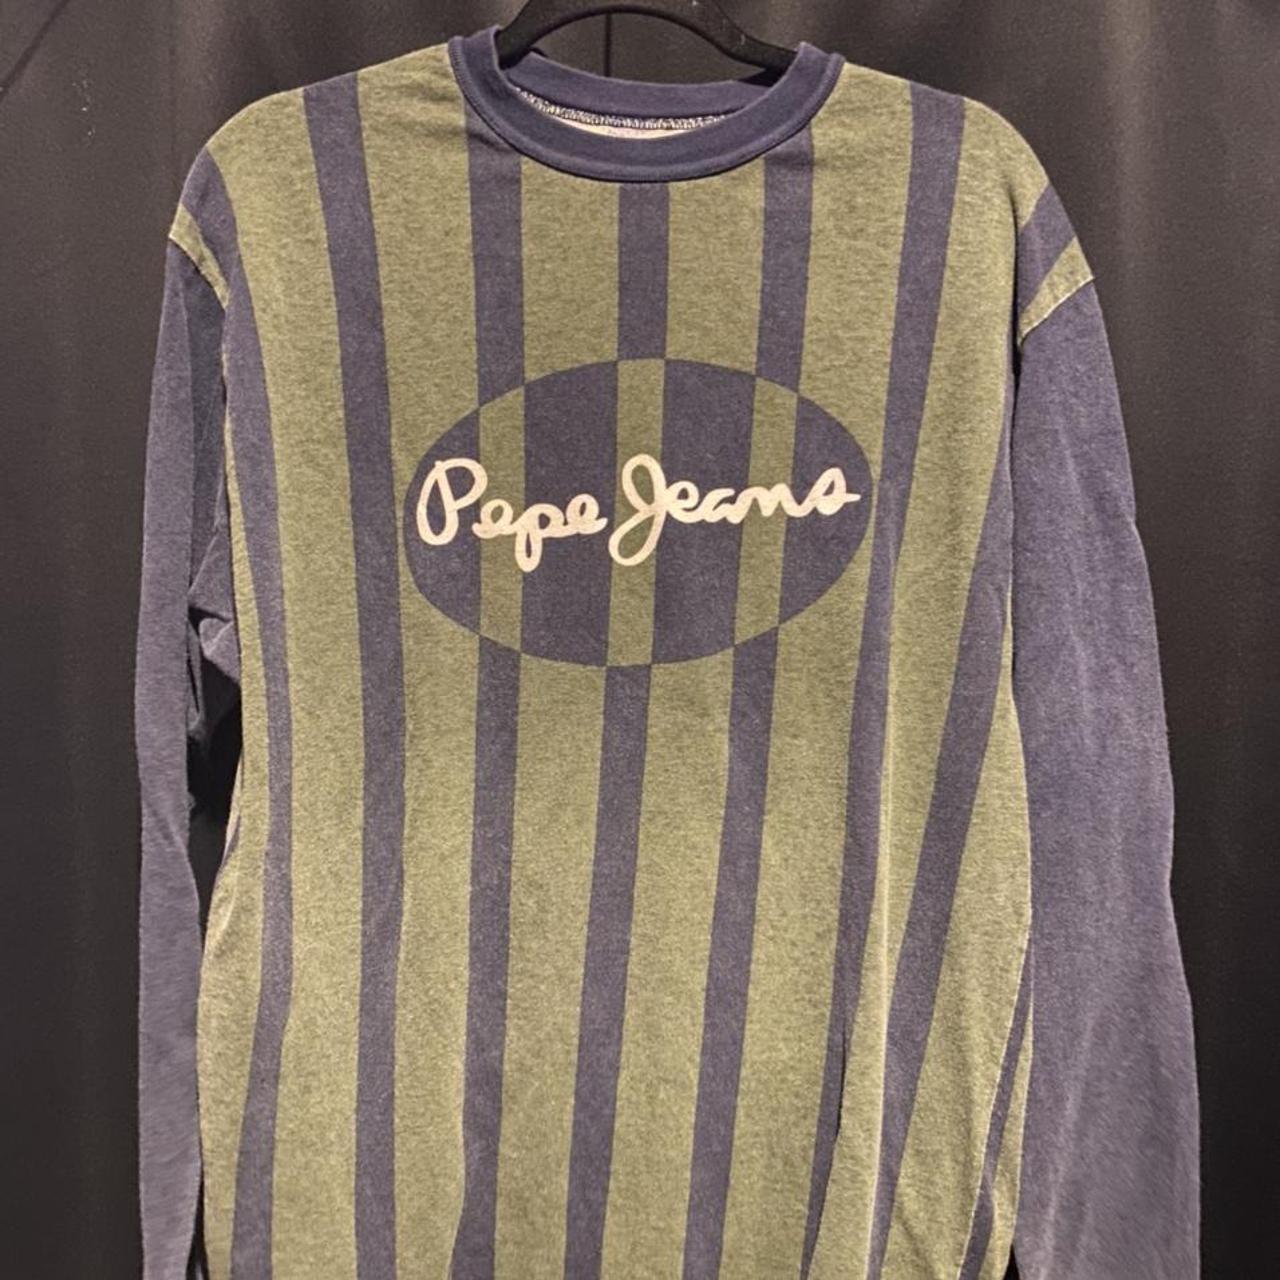 Pepe Jeans Men's Green and Navy Shirt